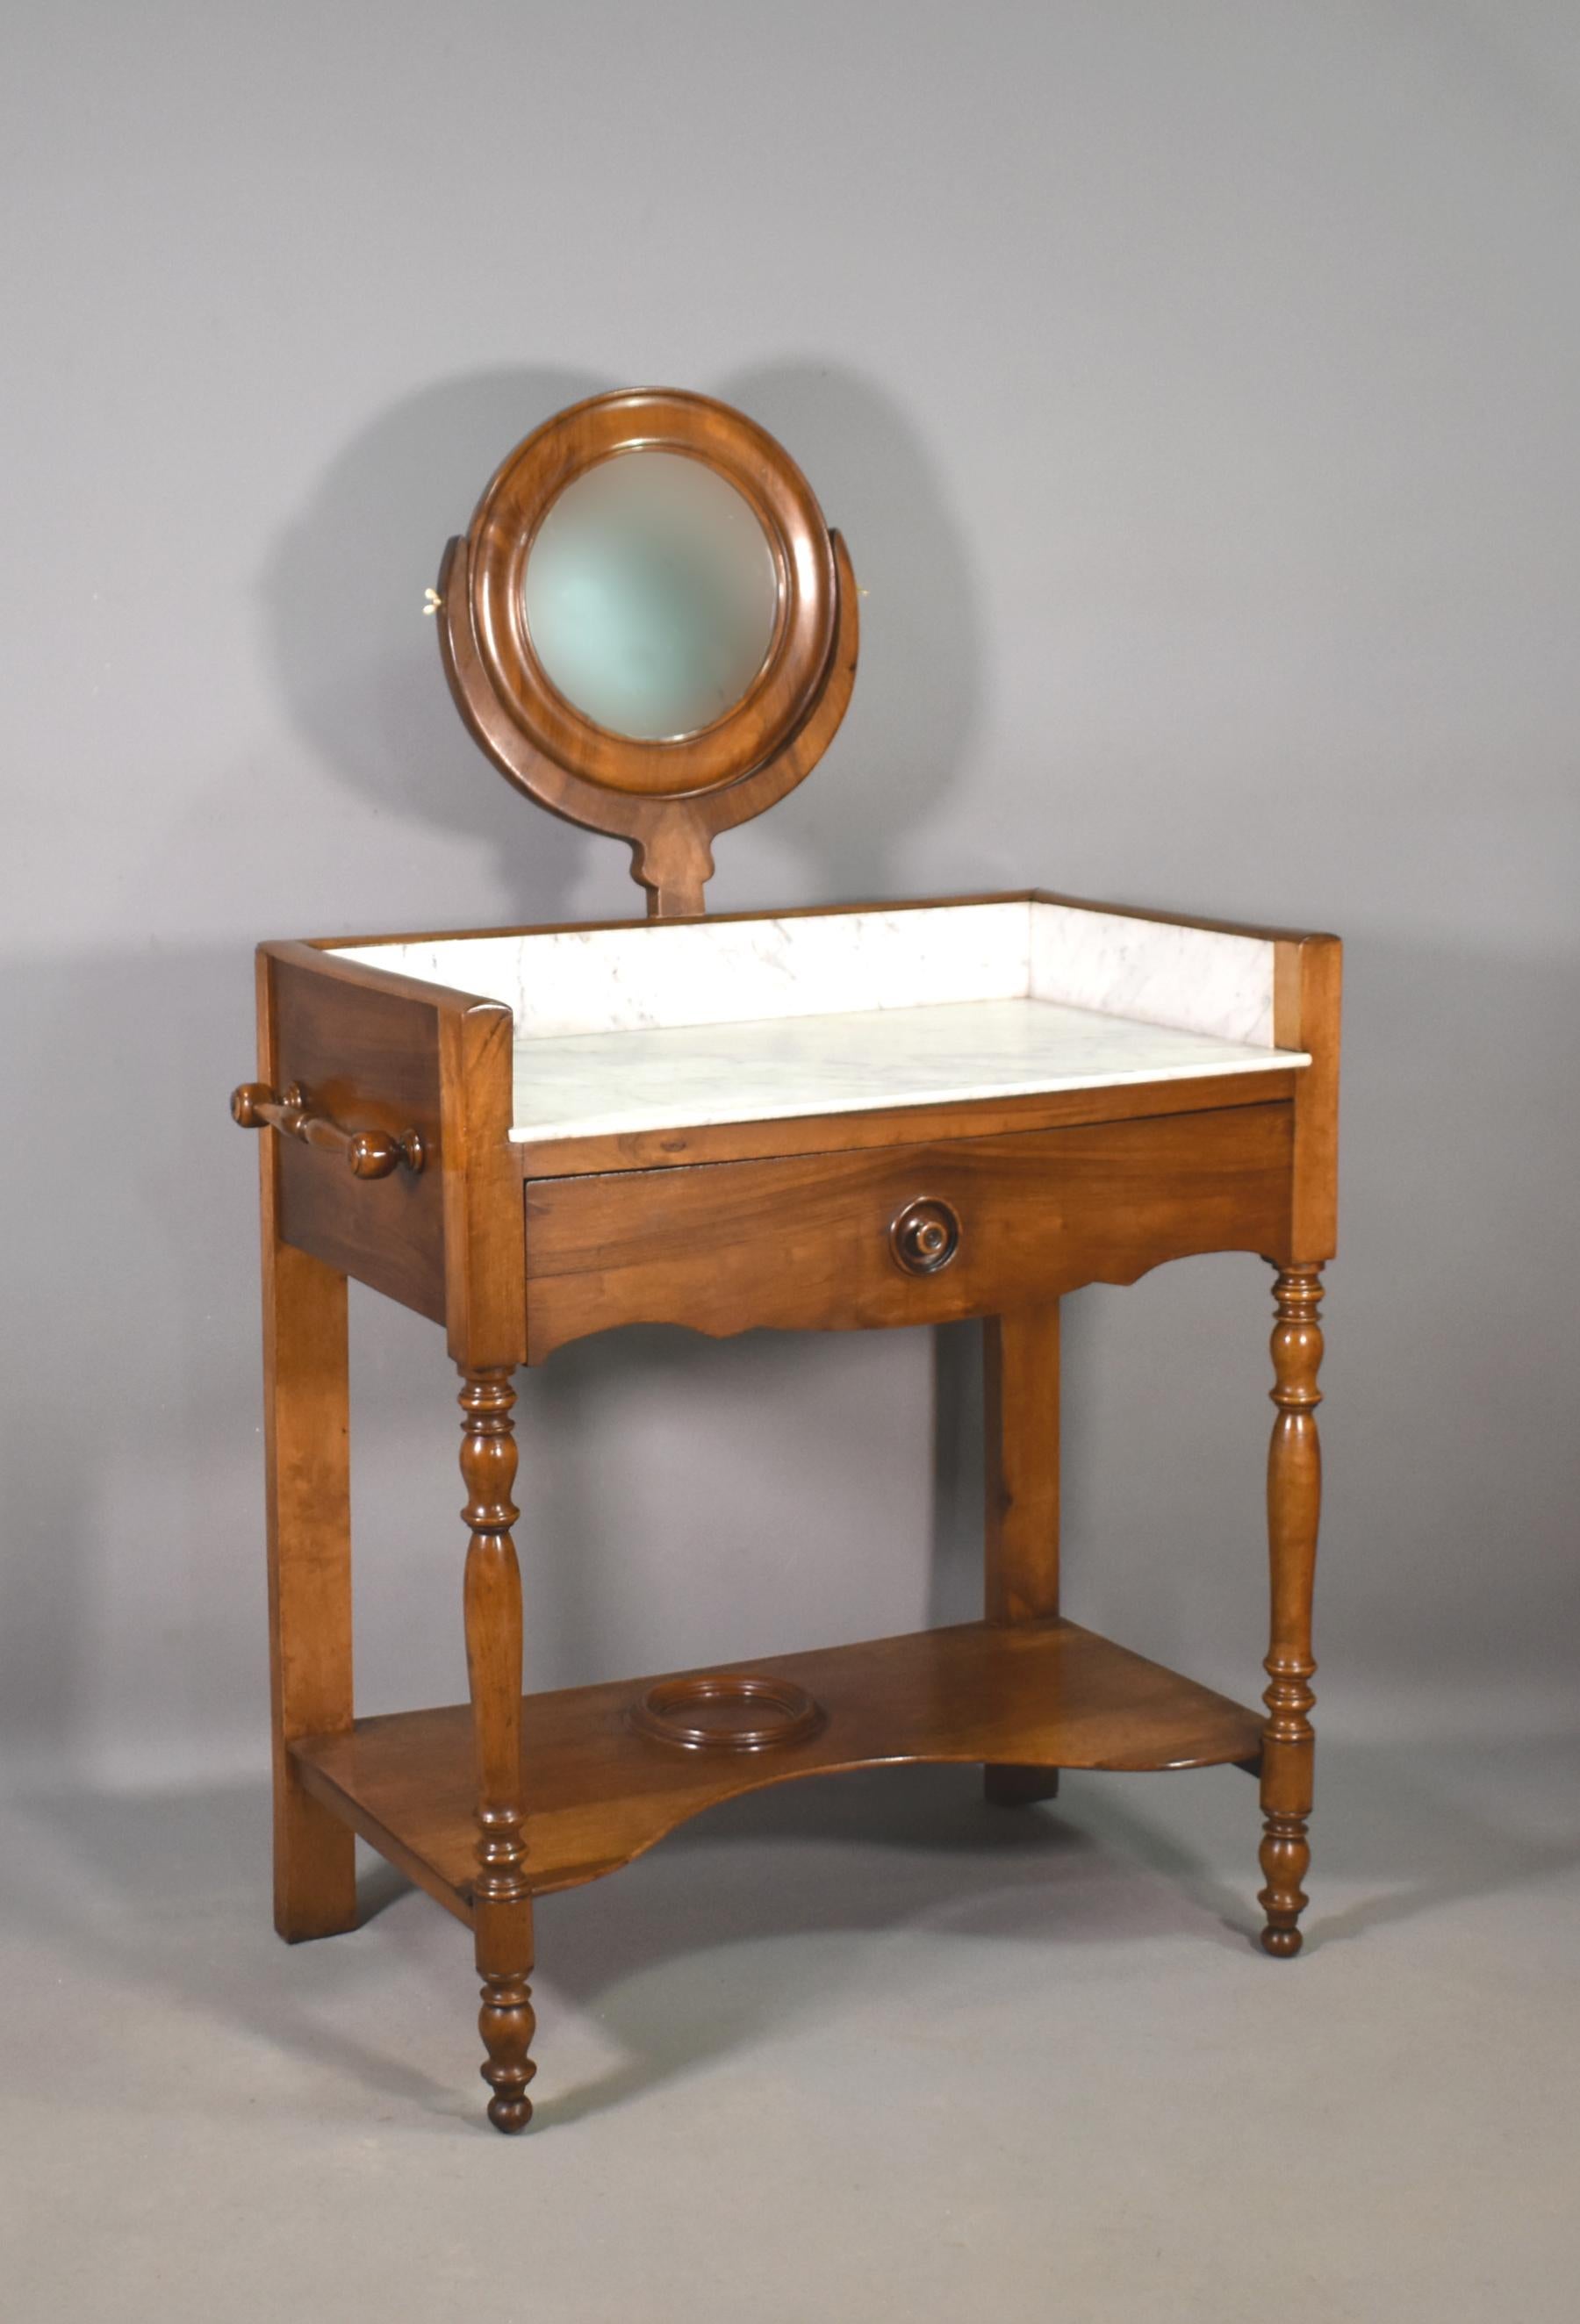 This lovely French Walnut Washstand is in great original condition and features a good-sized round mirror within a solid walnut frame with moulded inner and outer edges.

The mirror is held in a lyre support with brass wingnut adjusters.

The